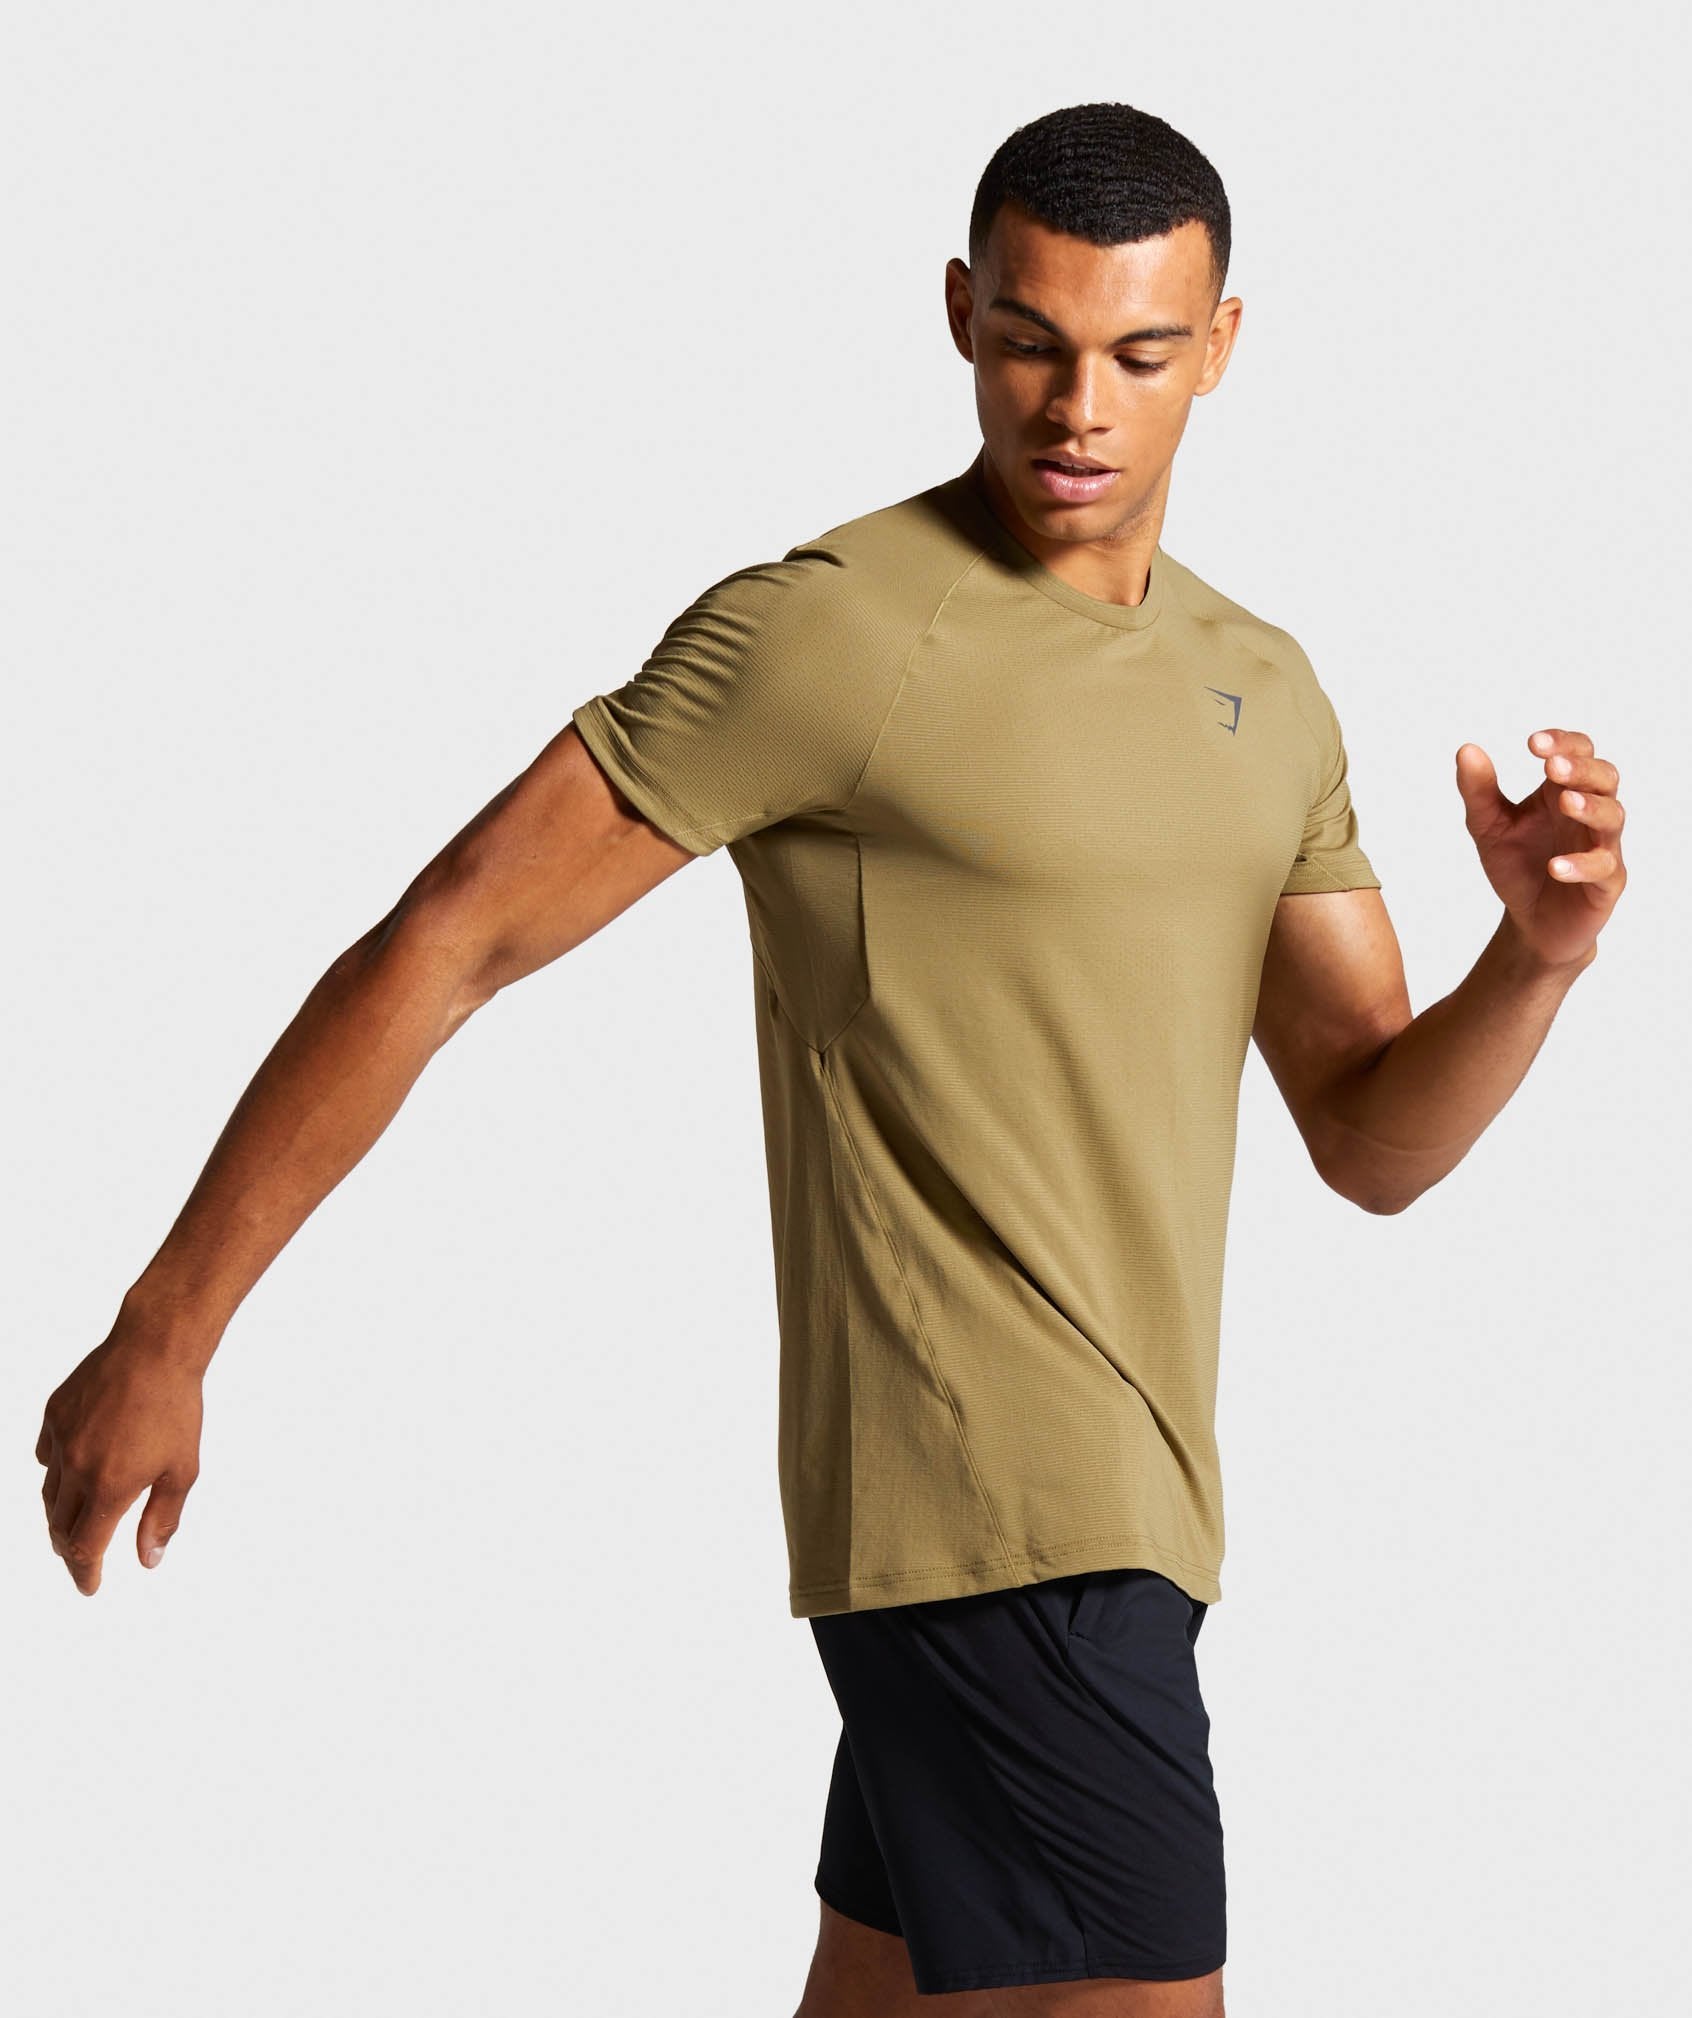 Contemporary T-Shirt in Khaki - view 3